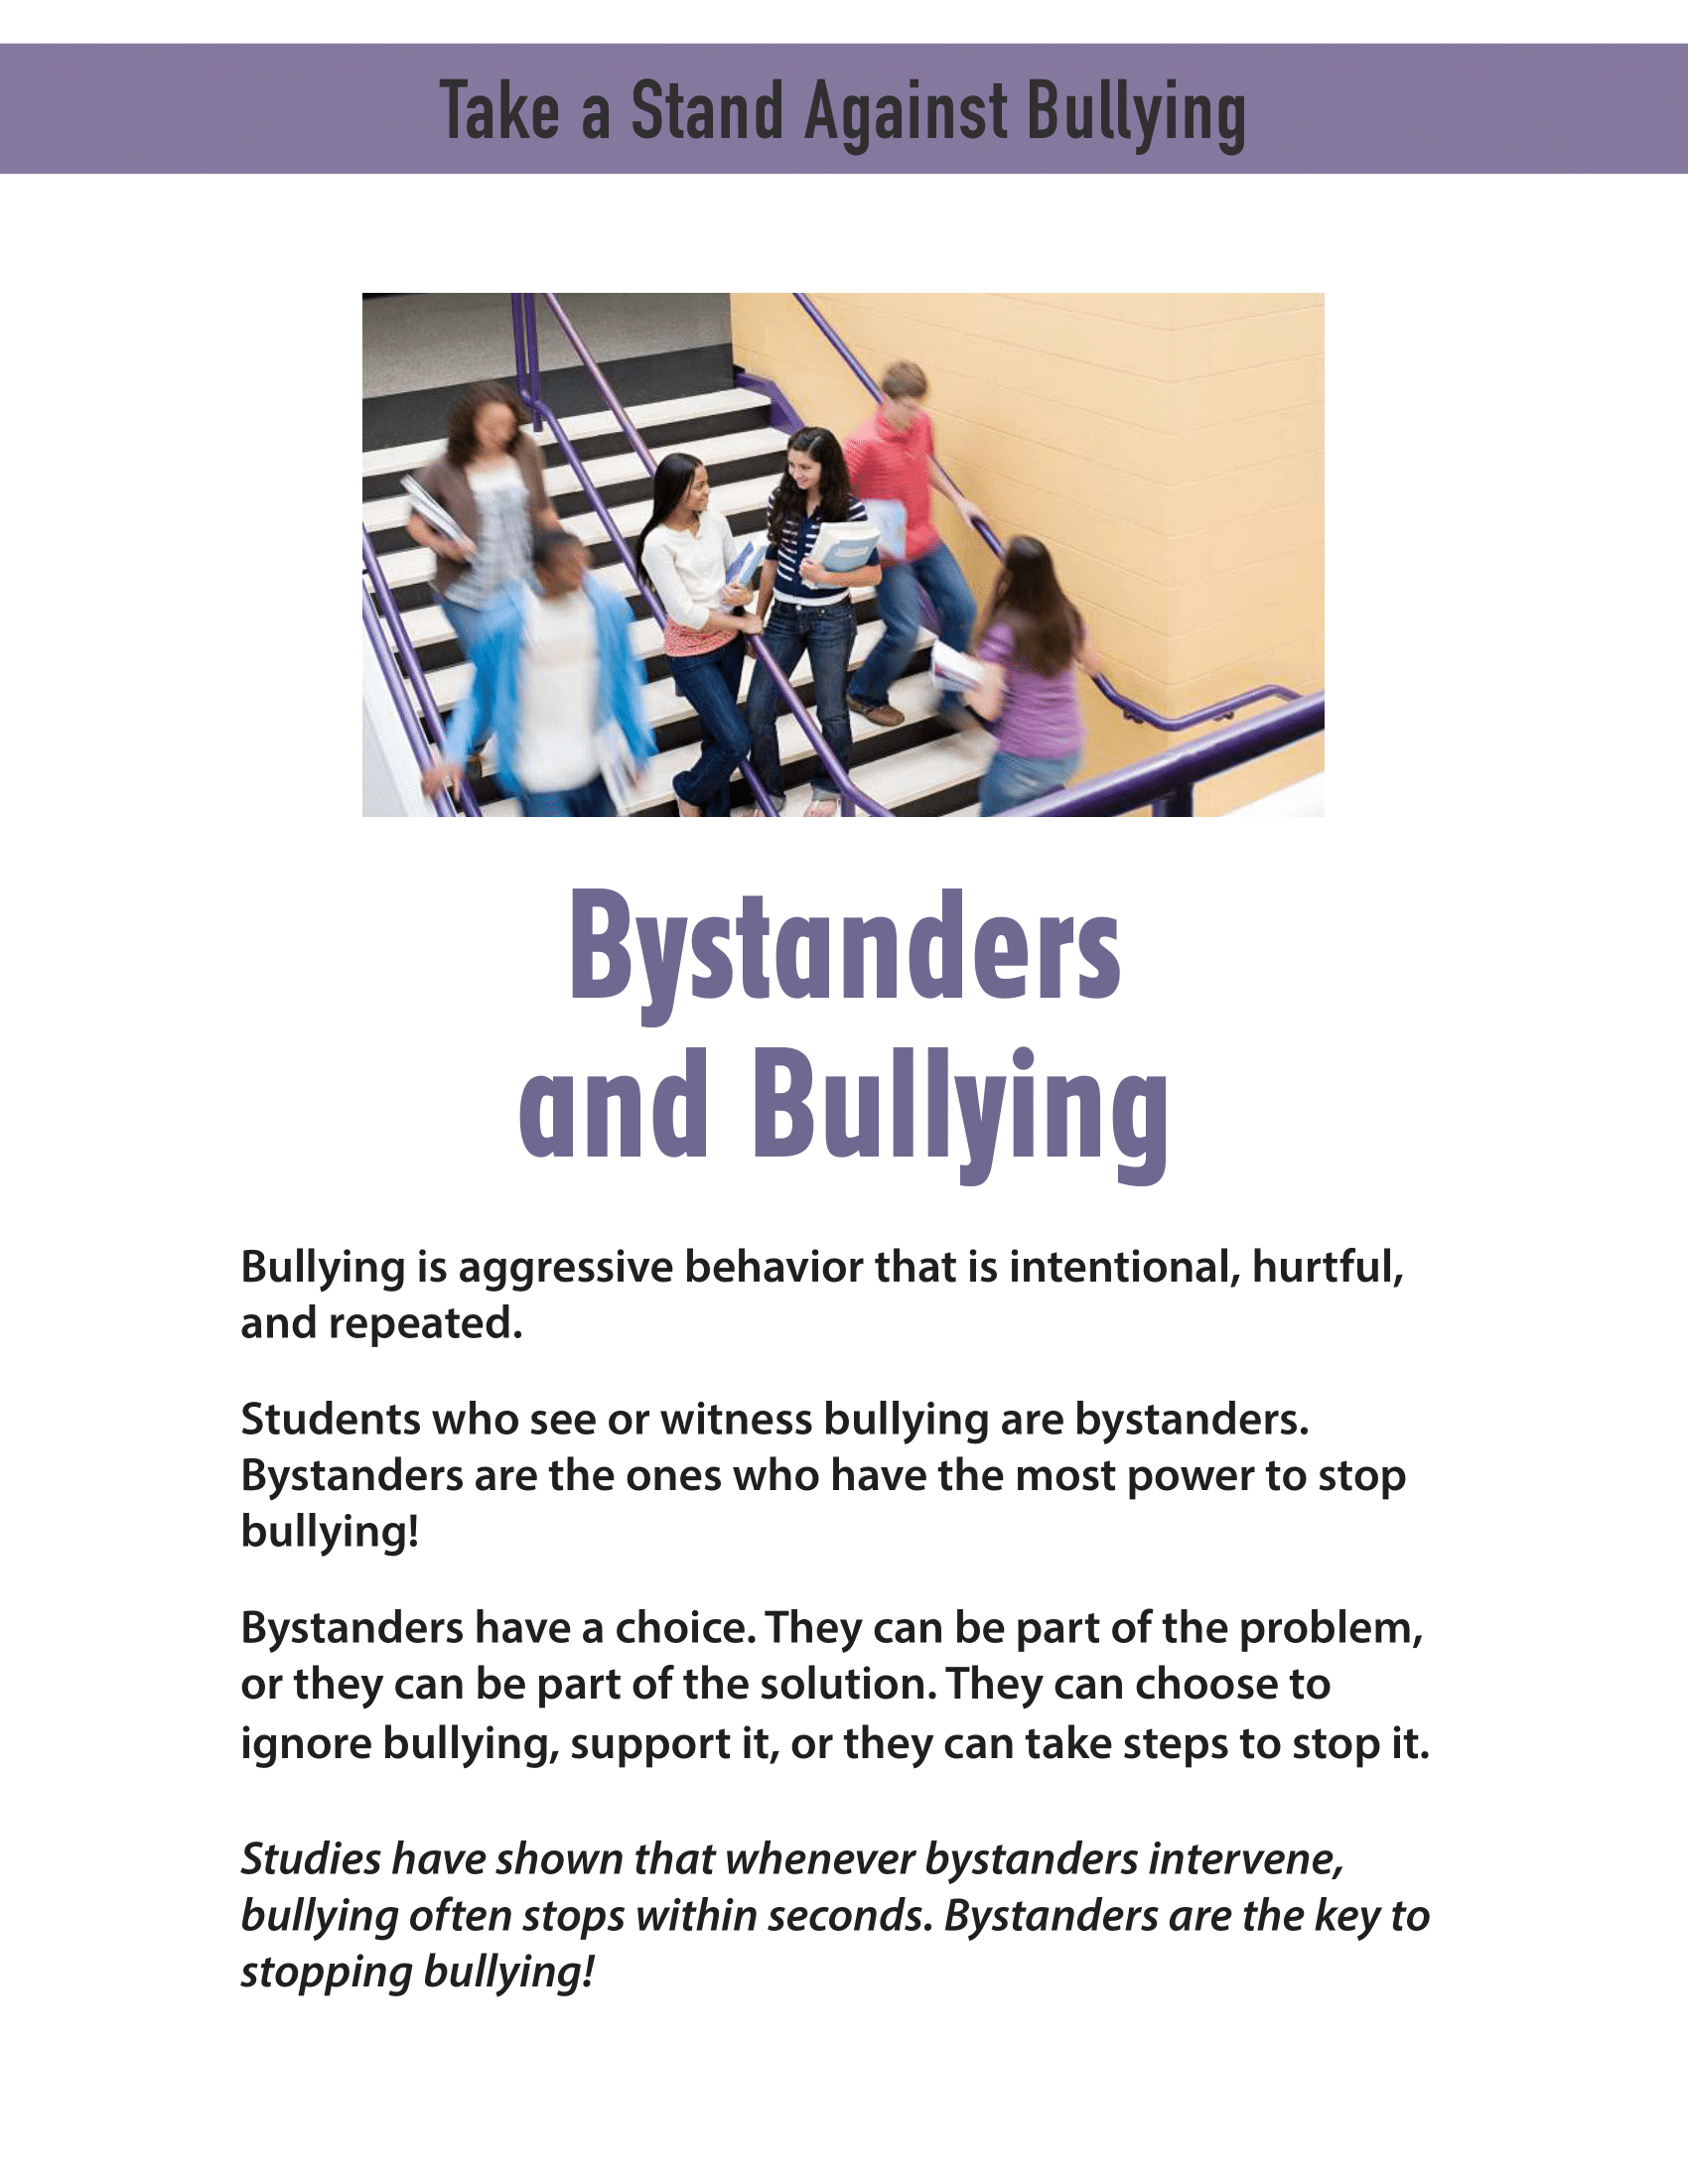 Take a Stand Against Bullying - Bystanders and Bullying